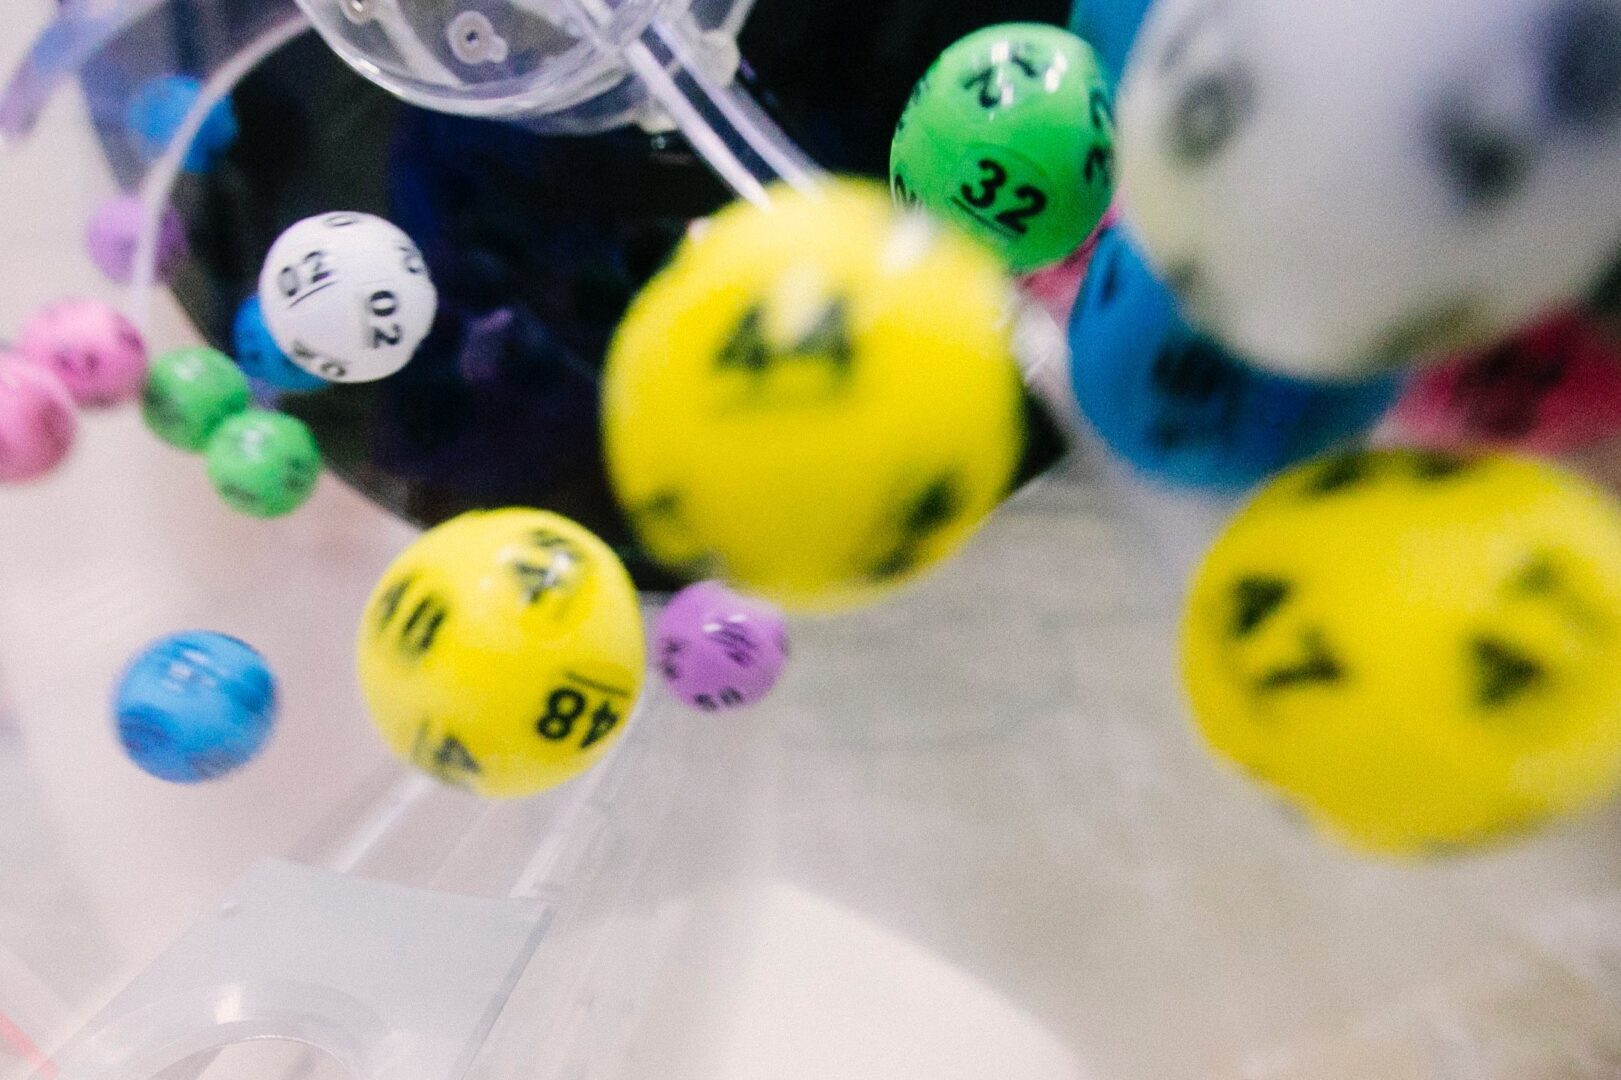 Lottery balls in a plastic container.